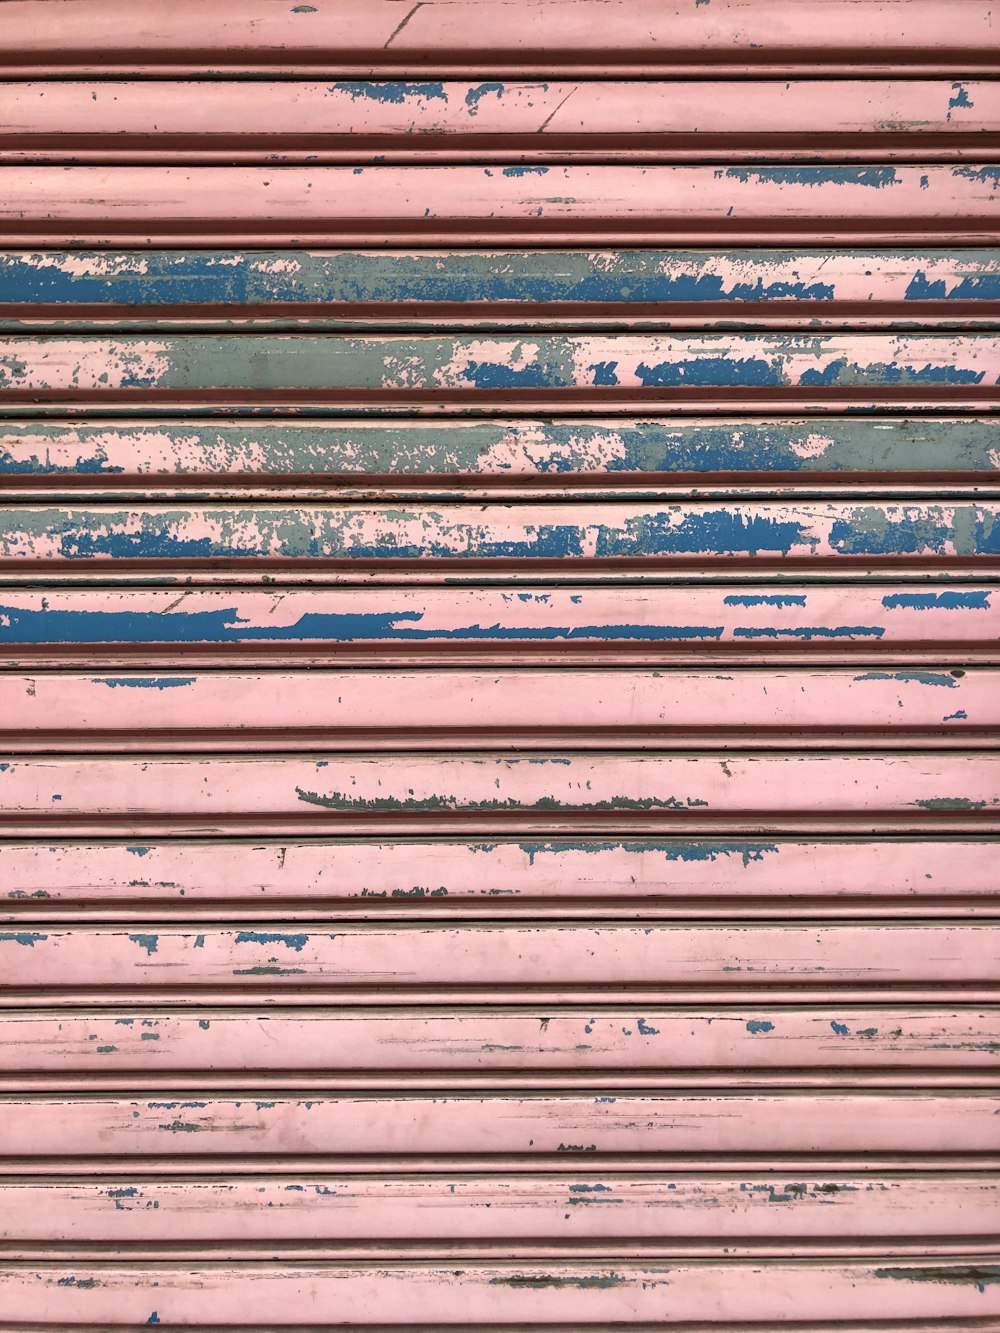 blue and white metal bars